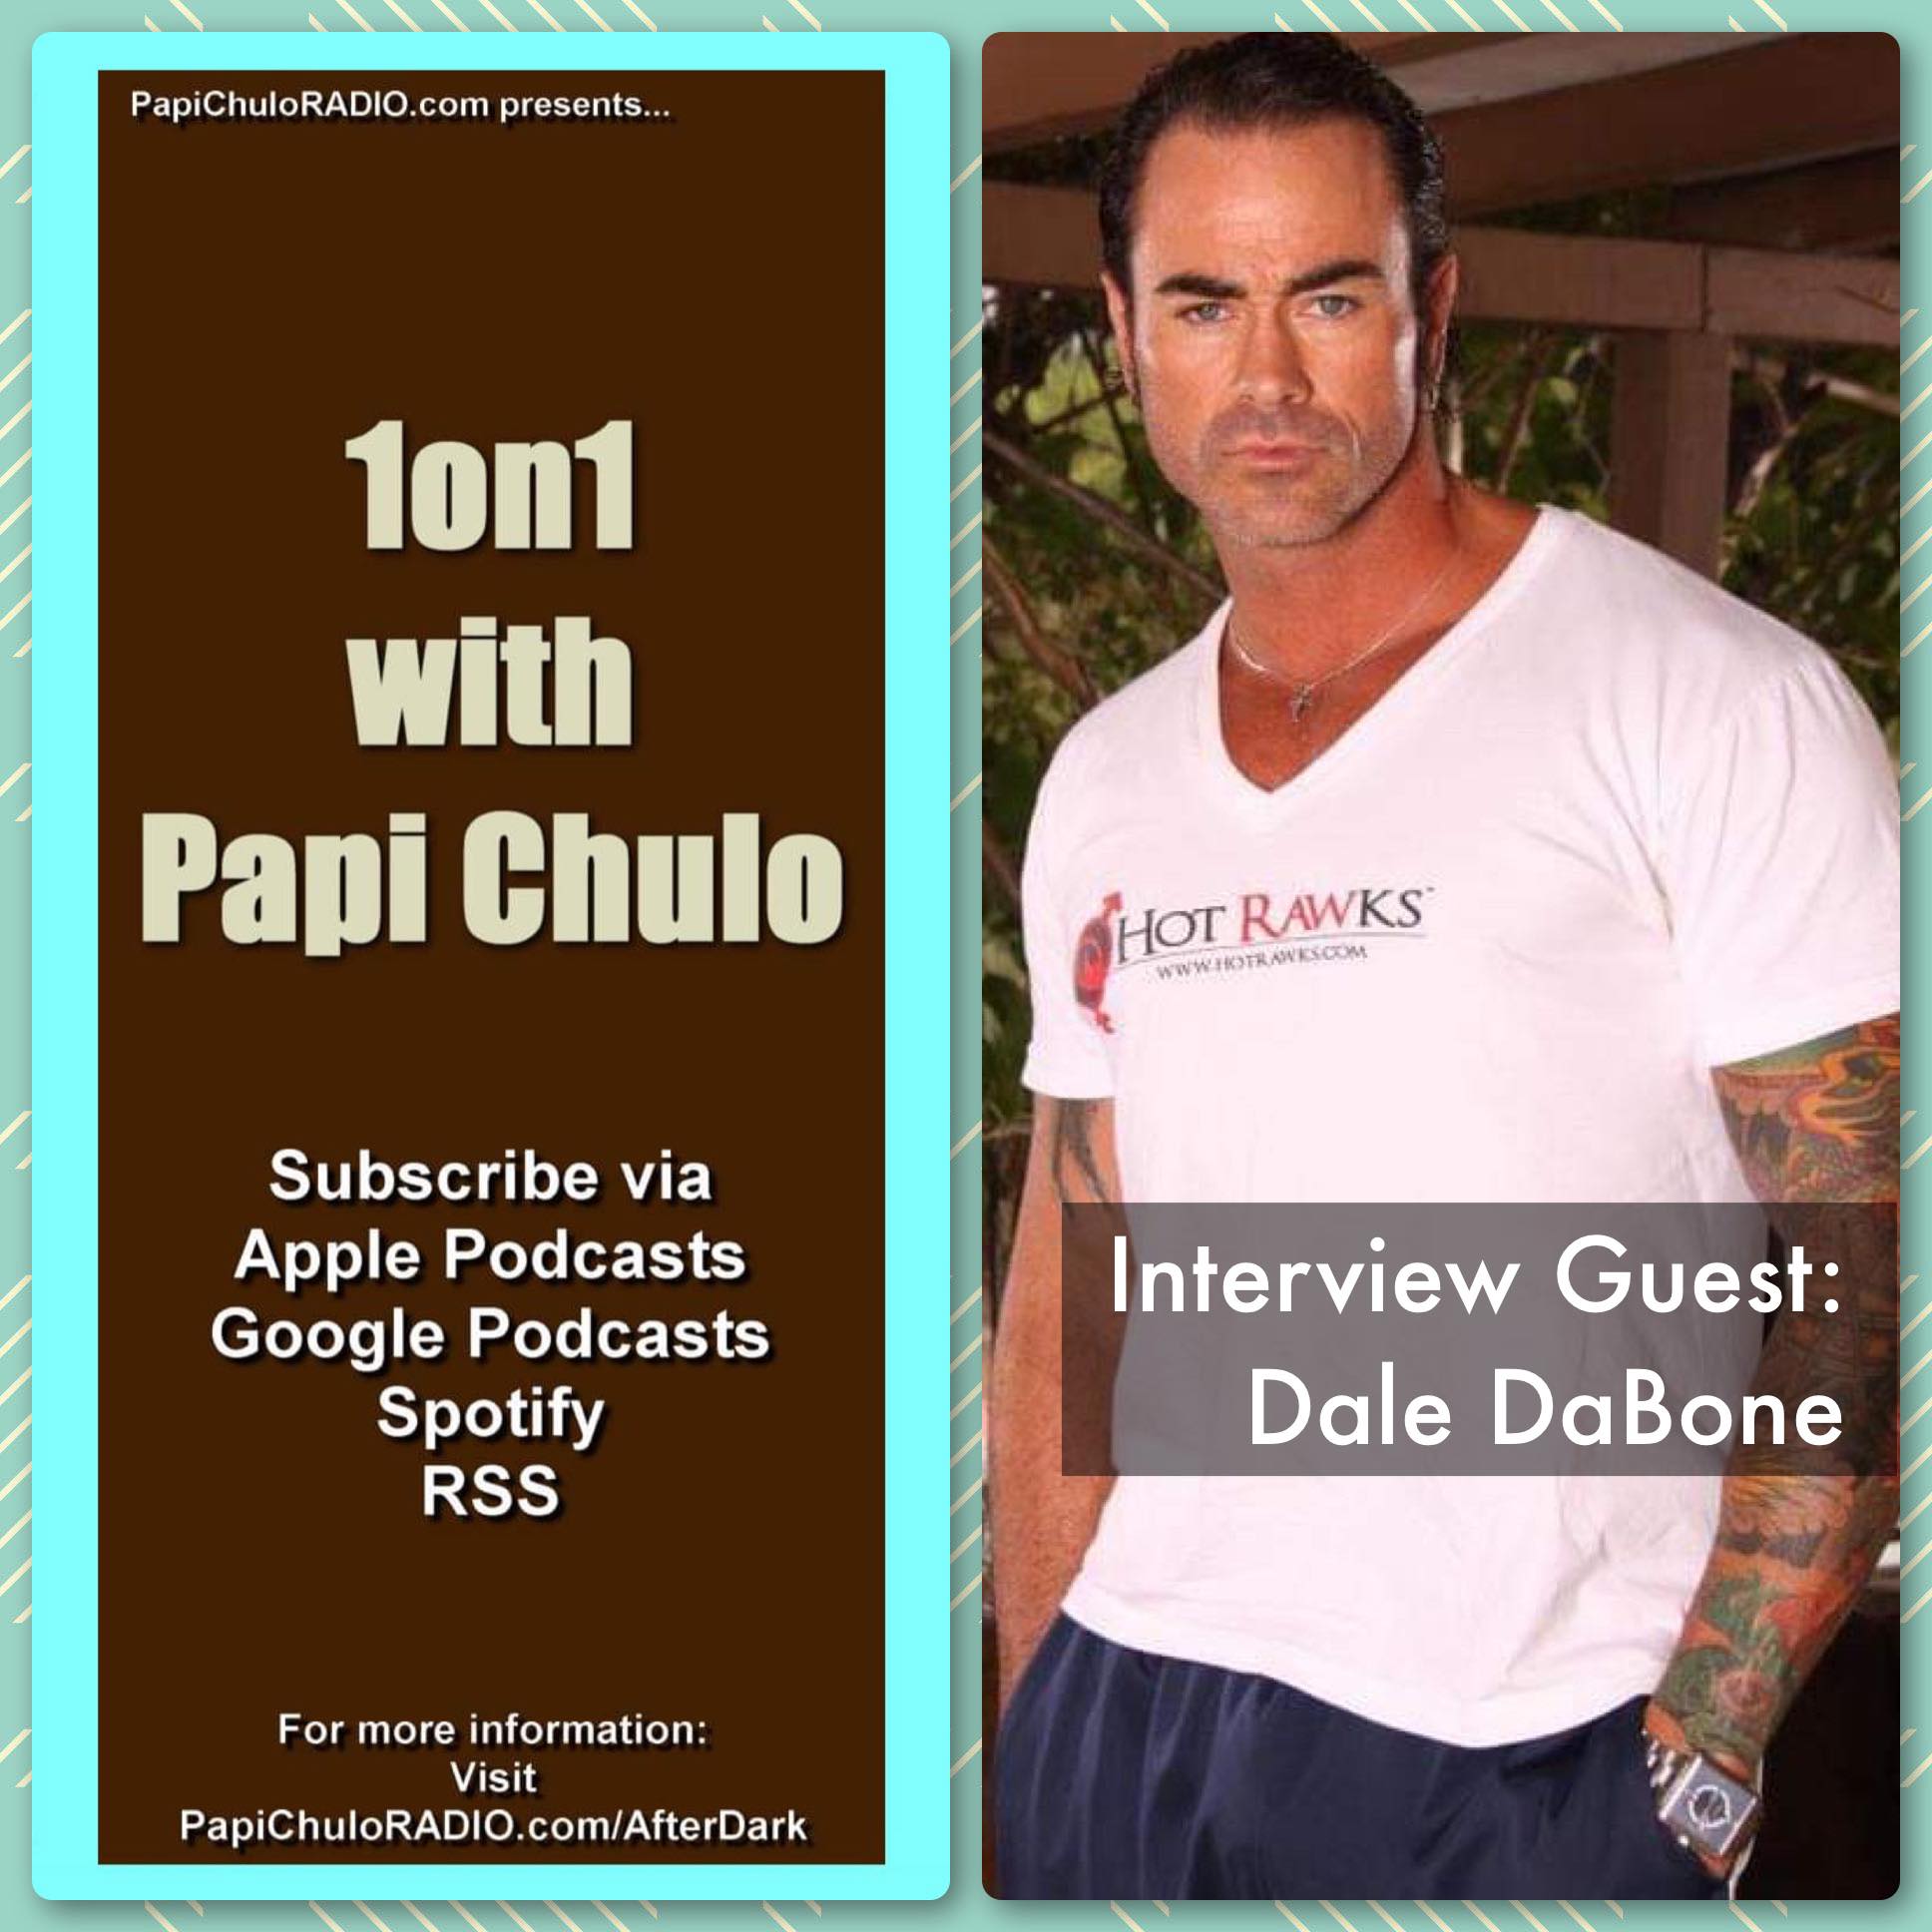 1on1 with Papi Chulo – Special Guest: DALE DABONE [April 8, 2015]